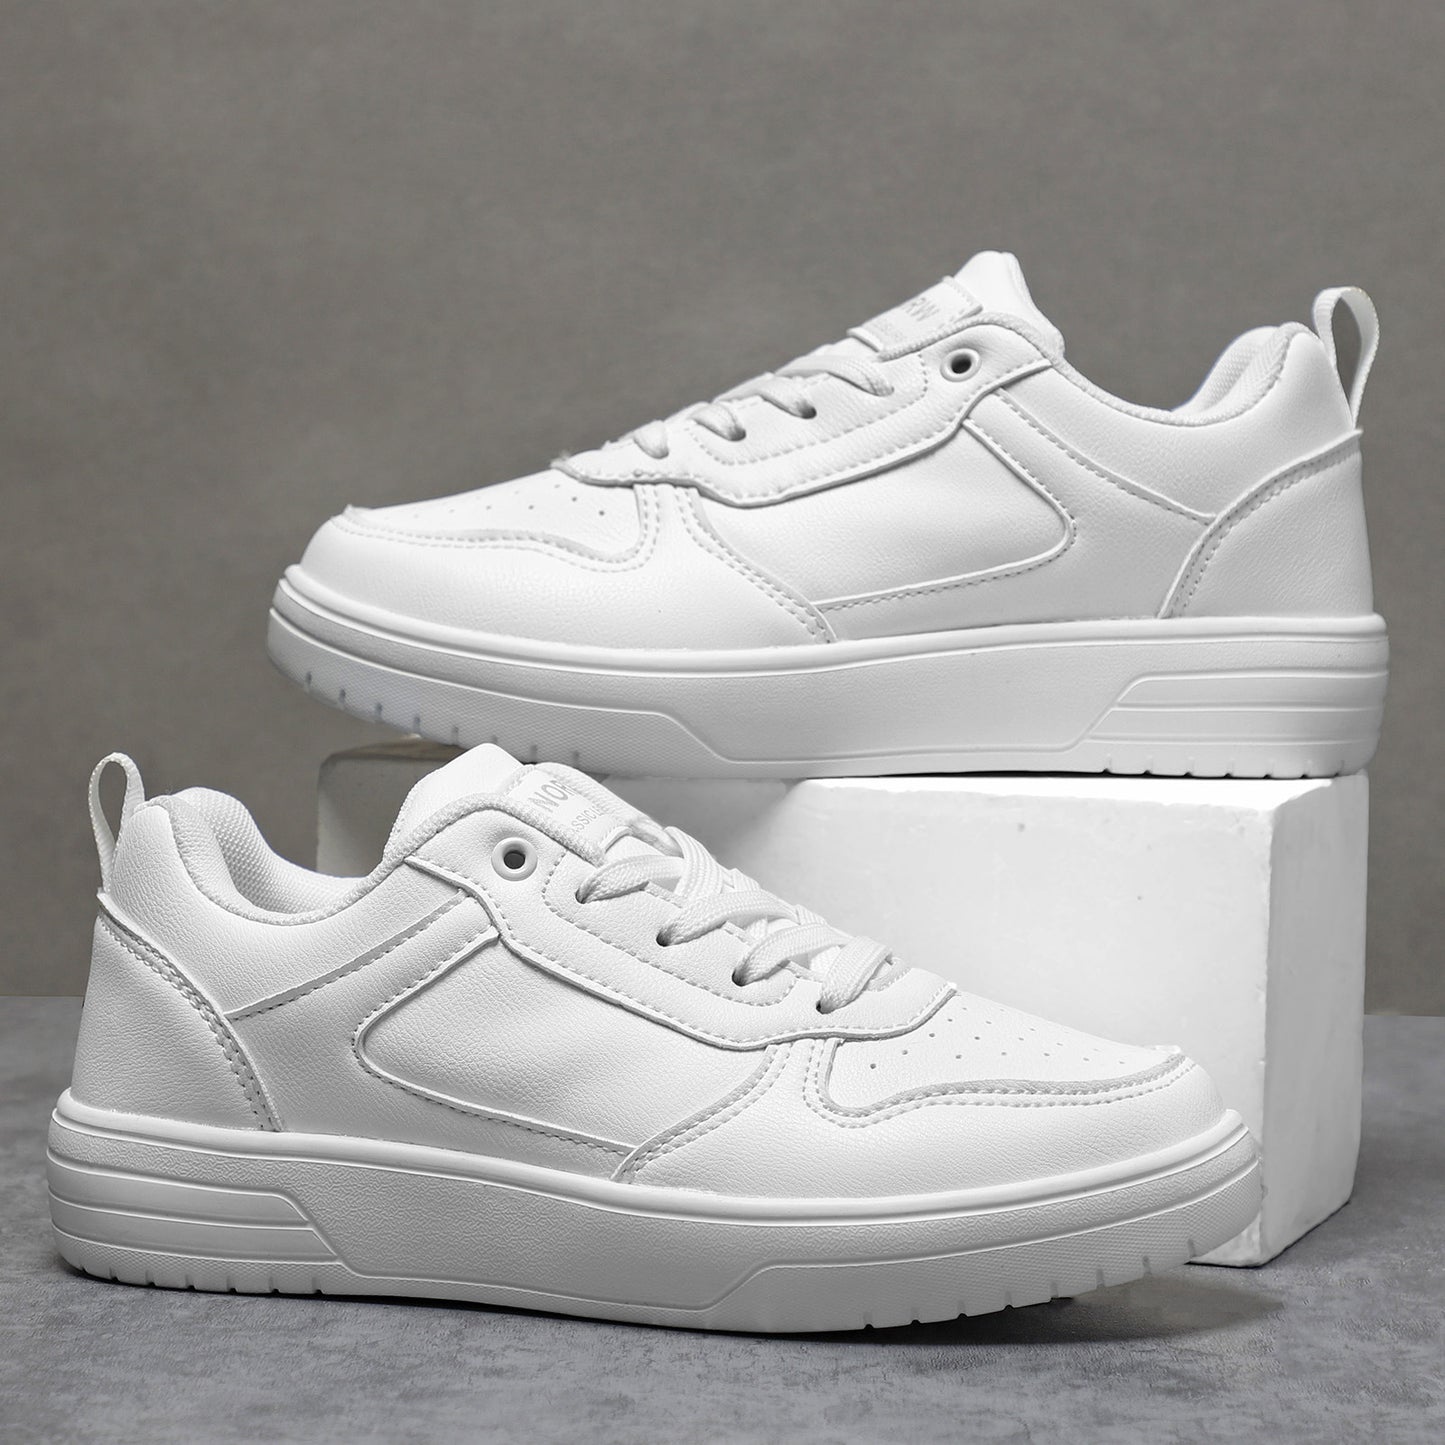 Couple style lightweight EVA classic sports white shoes